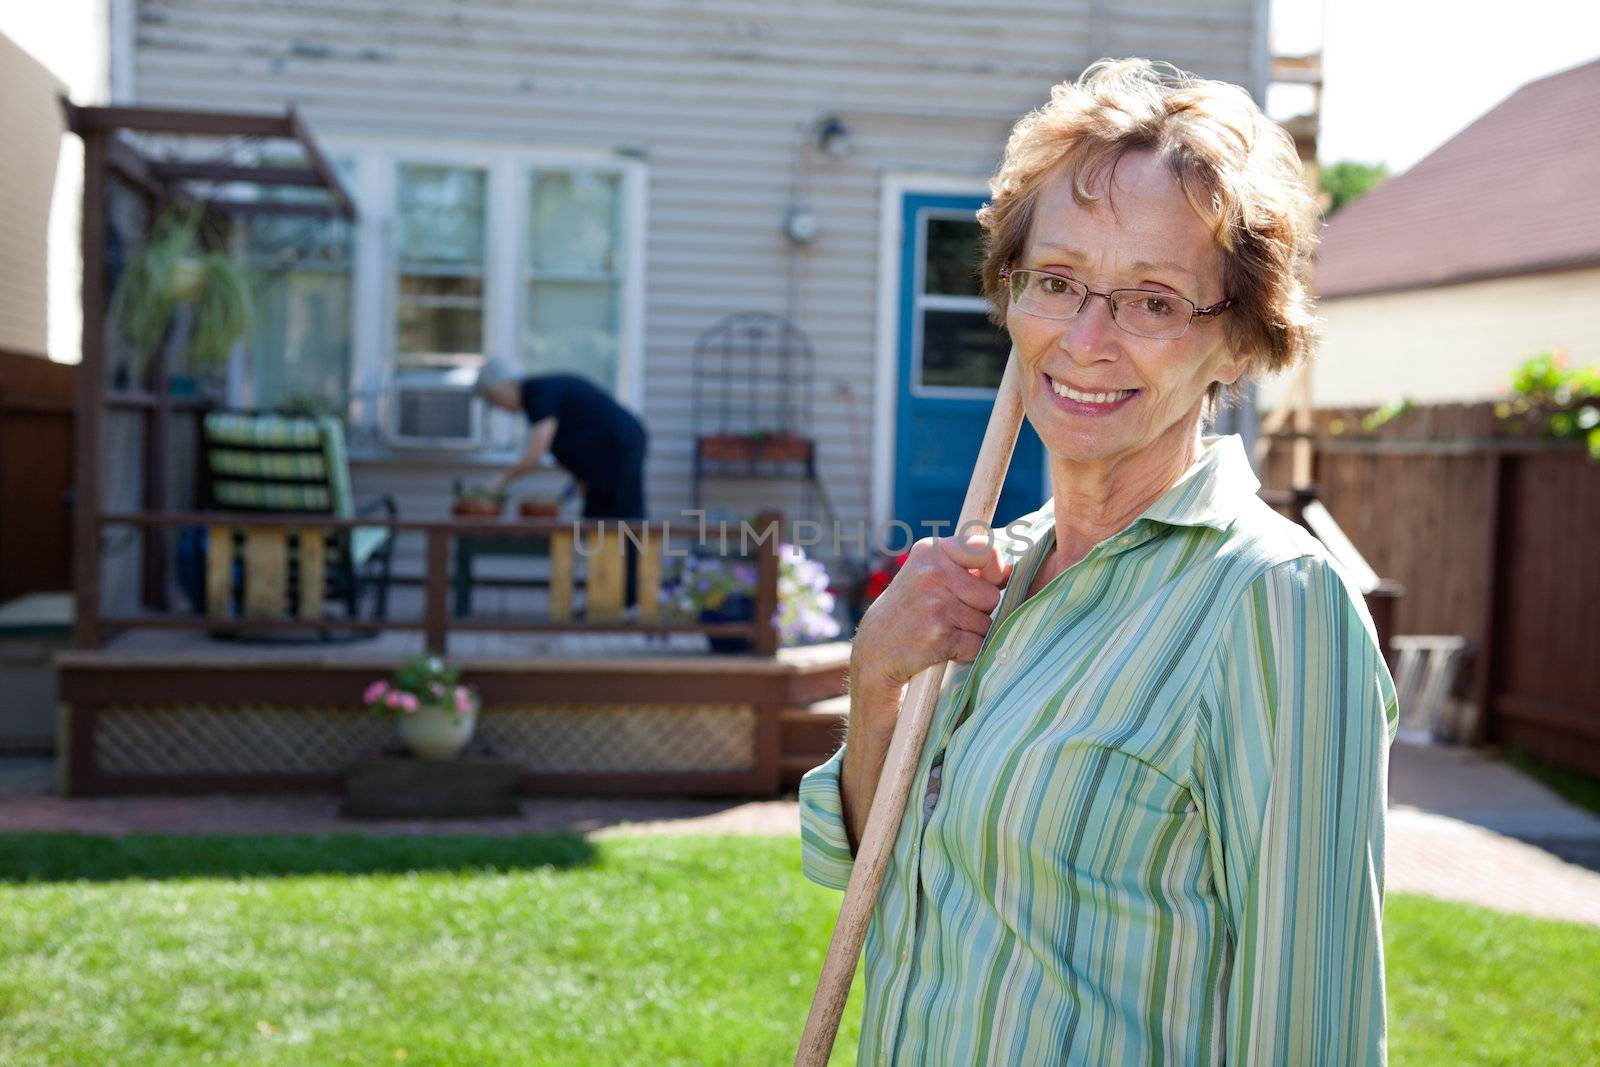 Portrait of elderly woman holding gardening tool with friend in the background